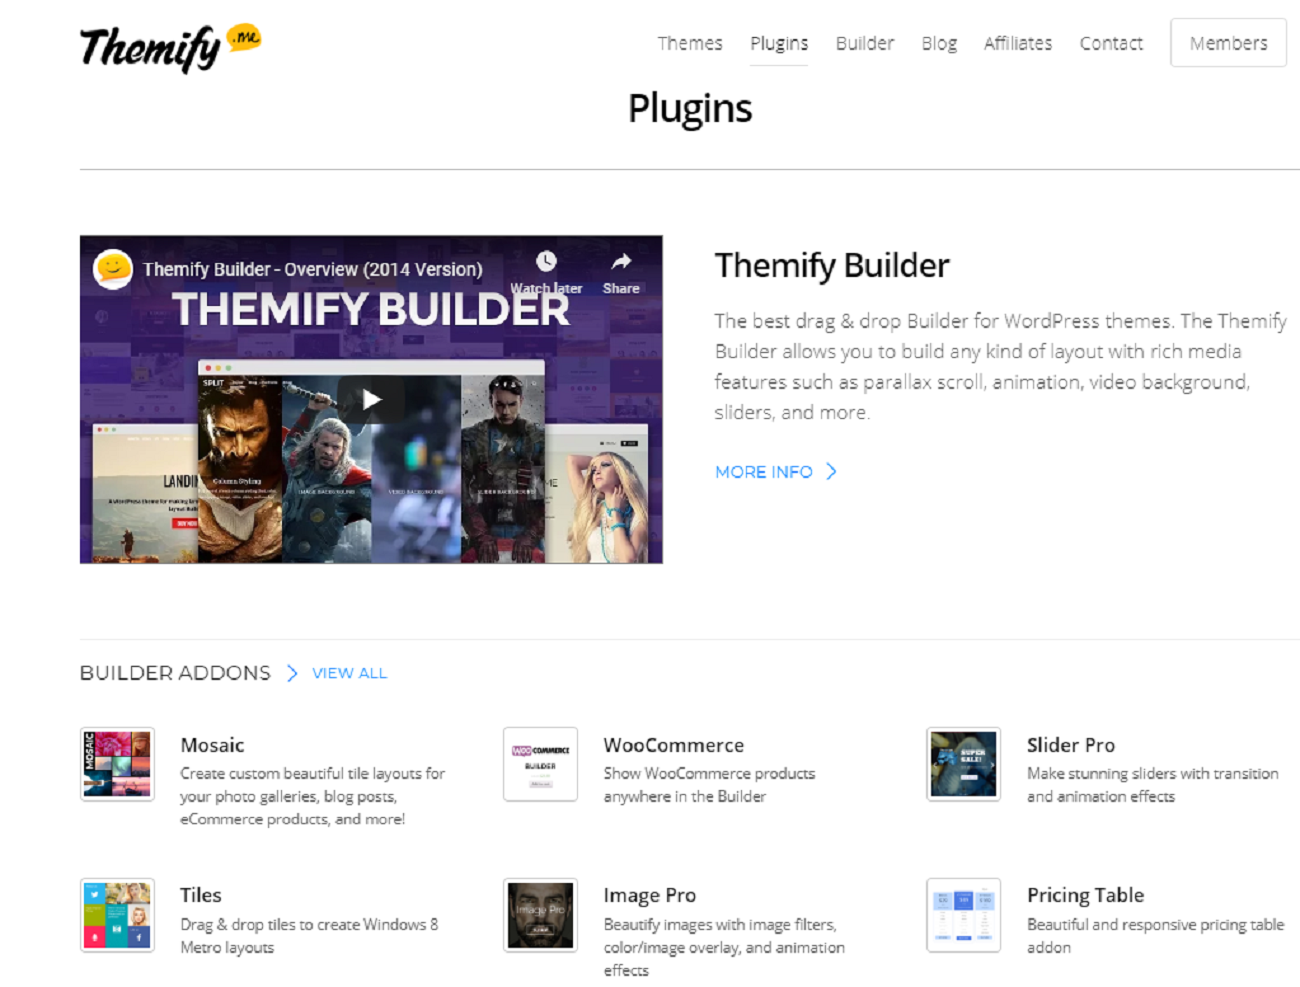 What Are the Features of Themify?